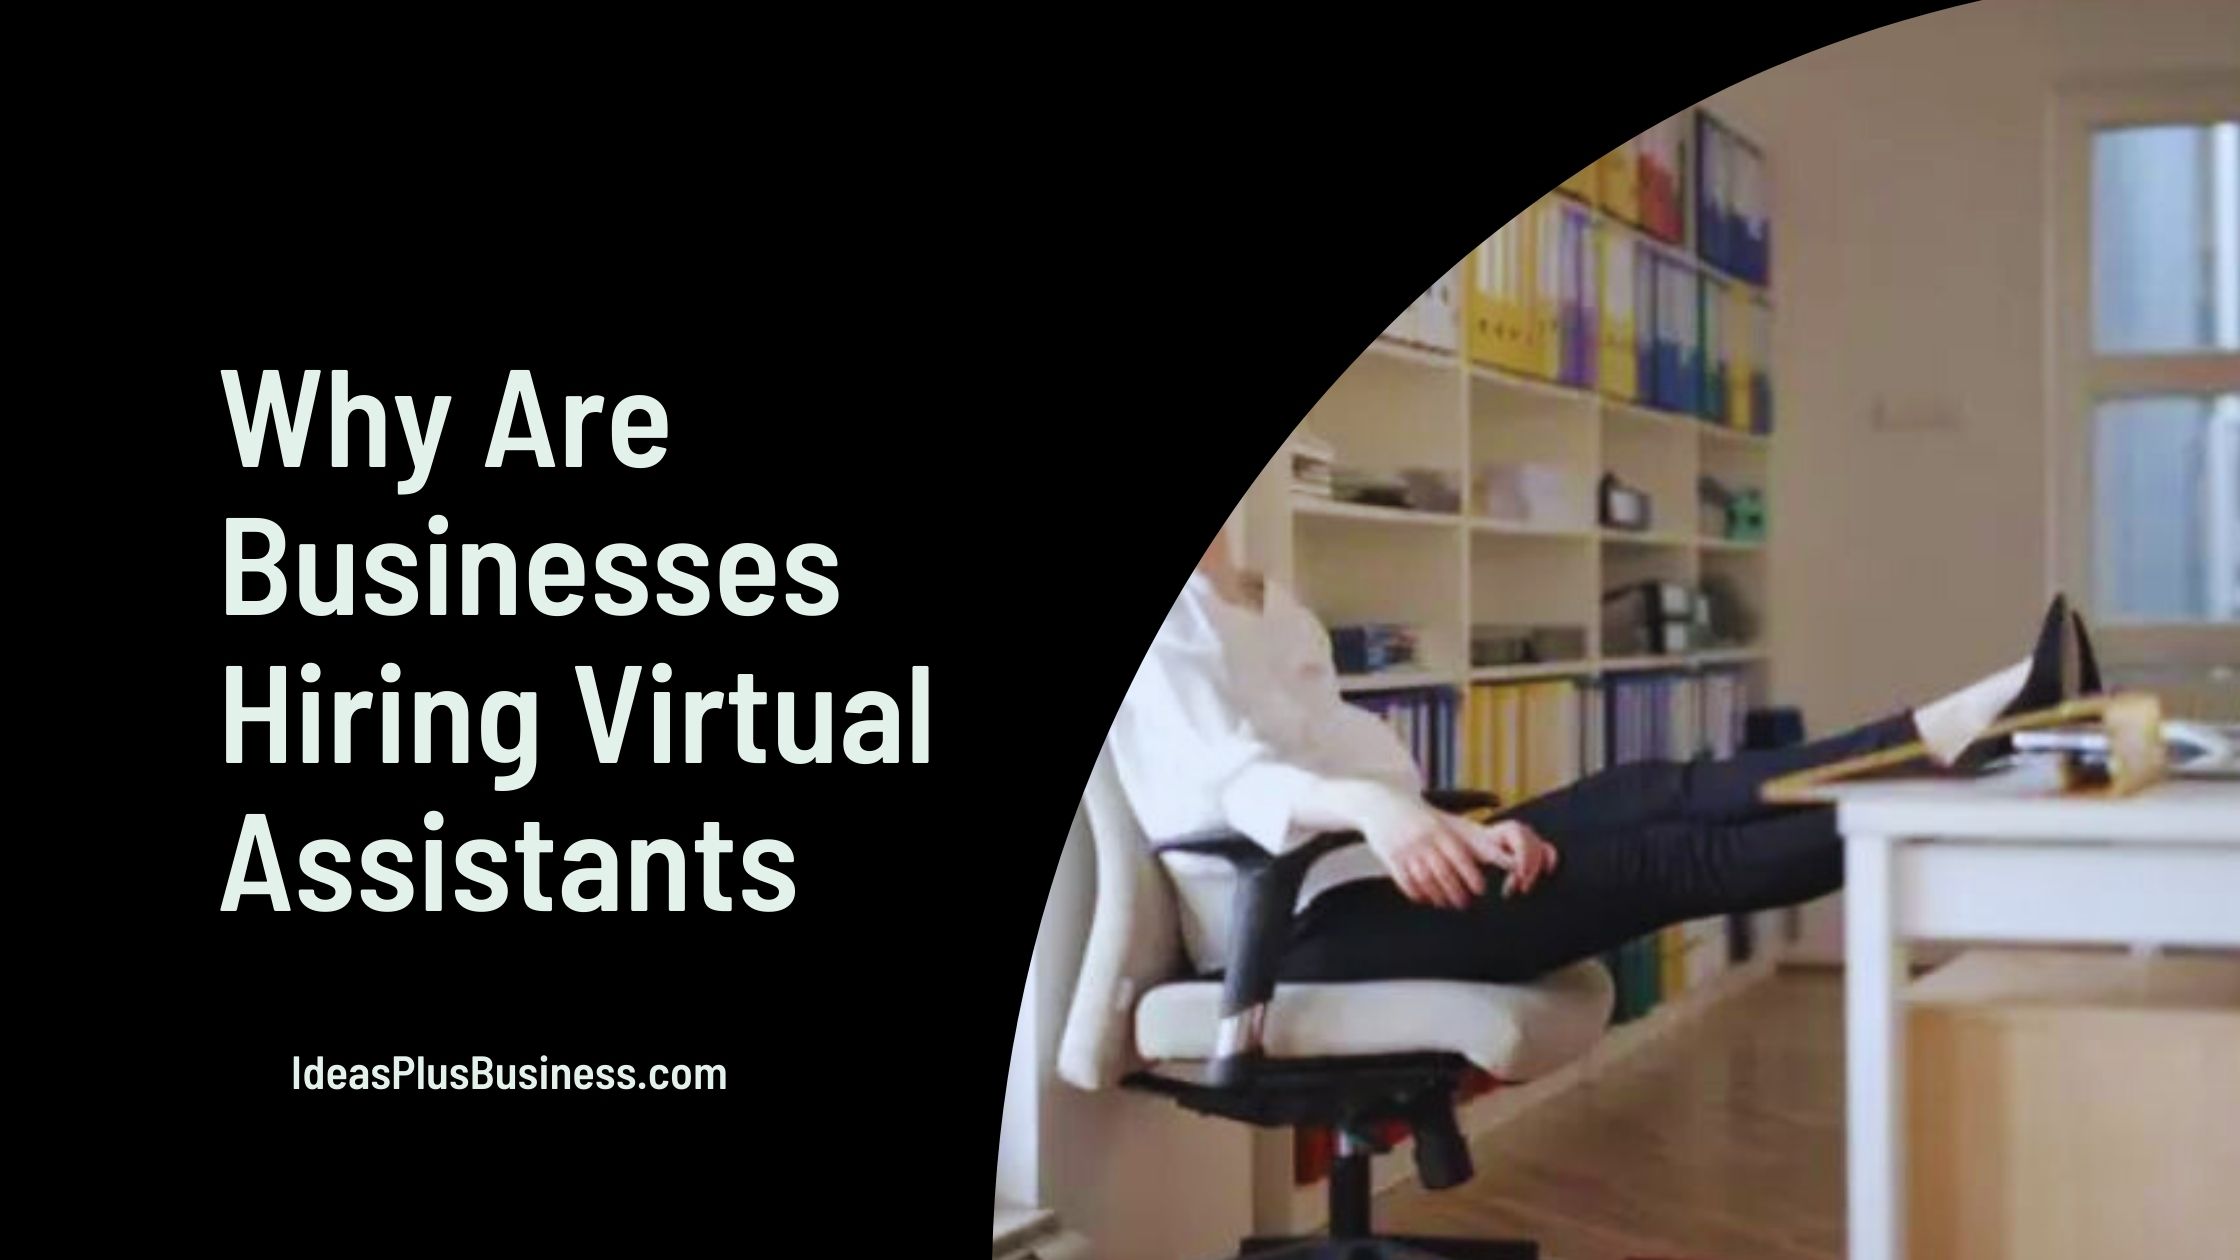 Why Are Businesses Hiring More Virtual Assistants Today